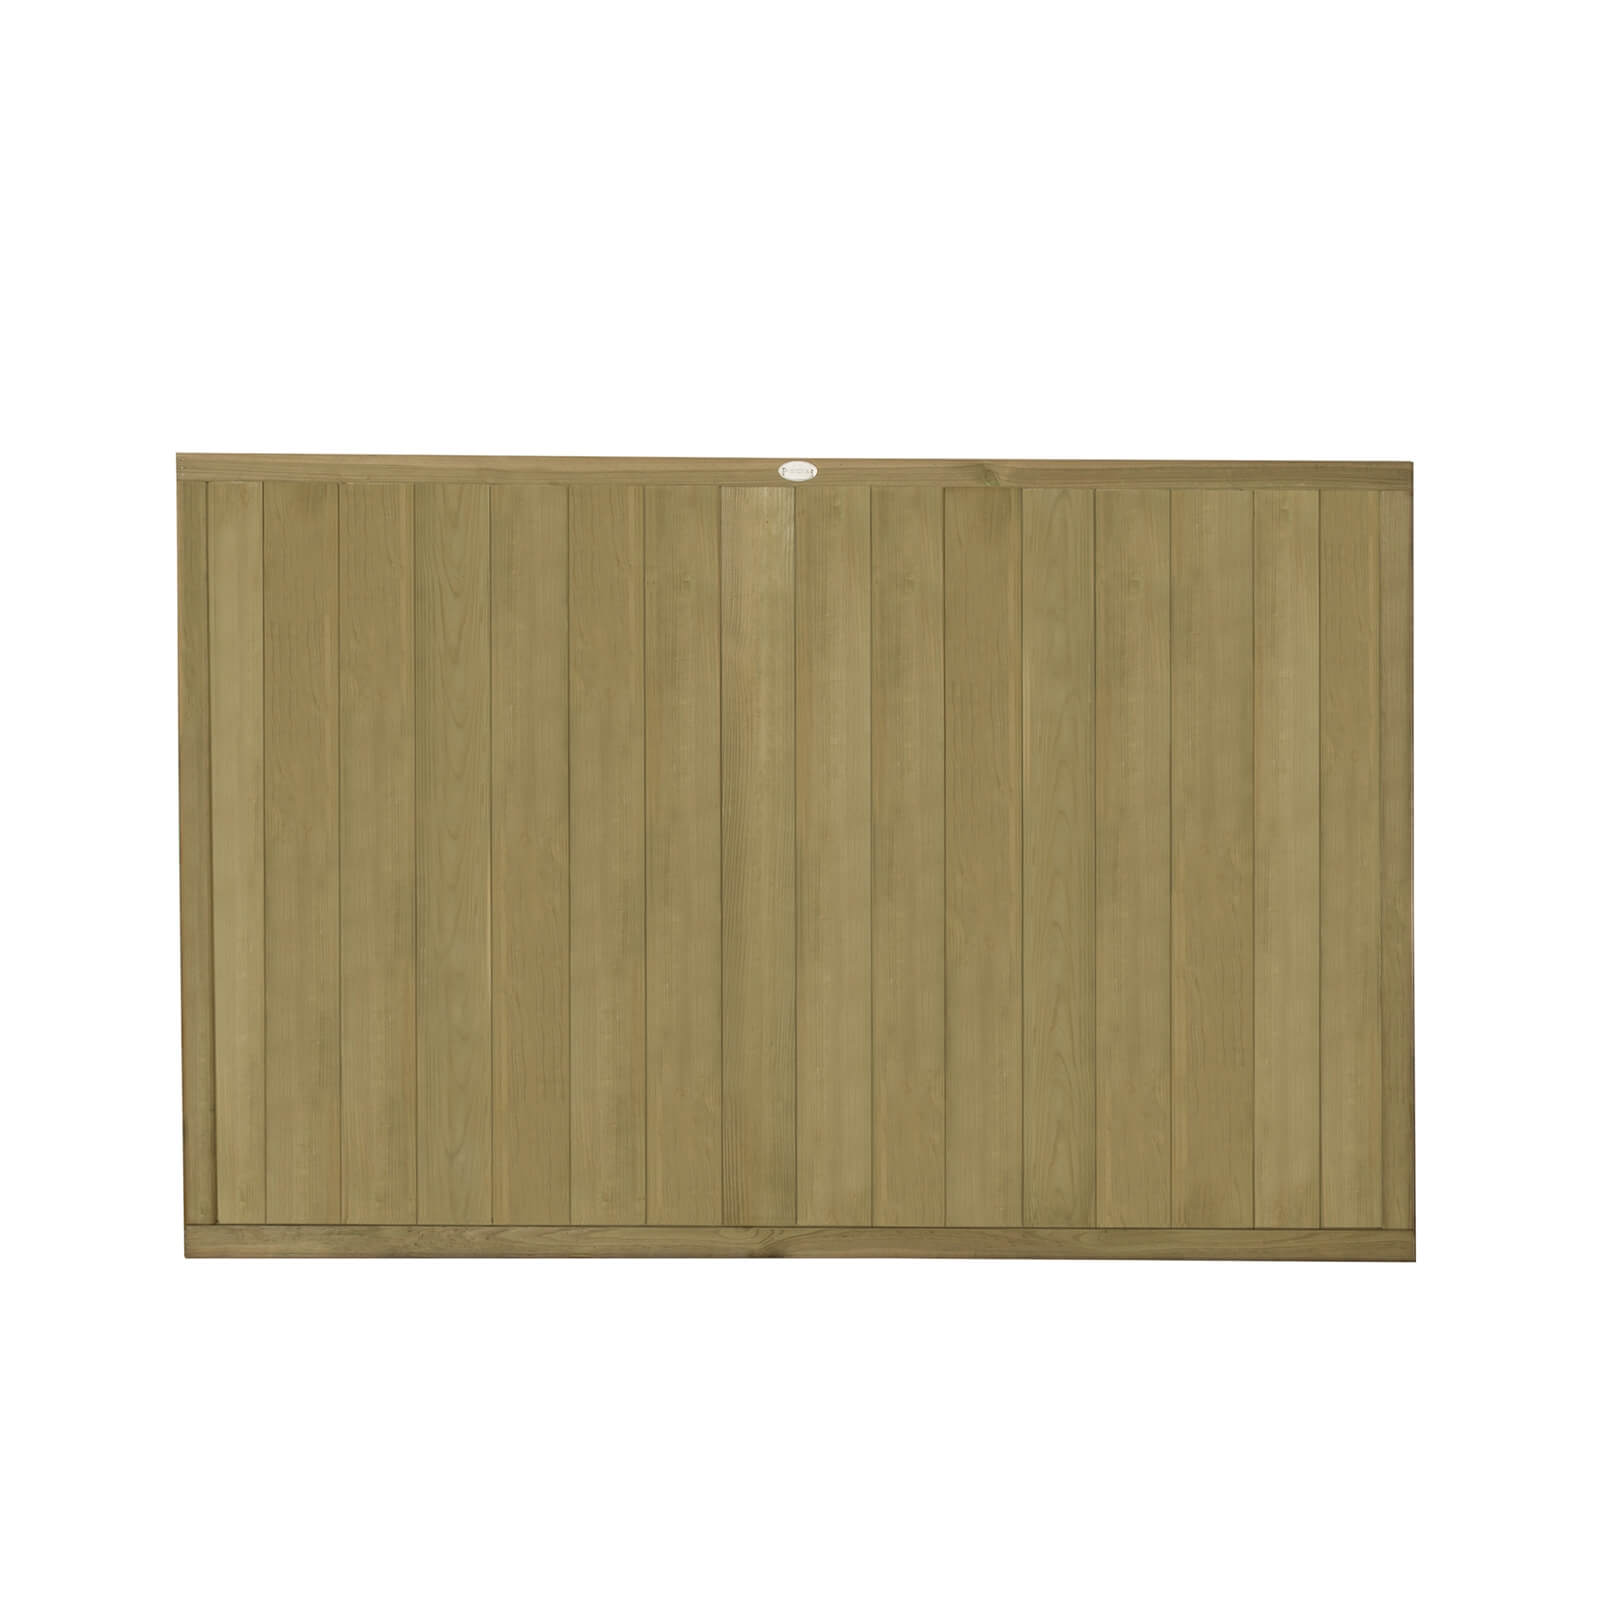 Forest Vertical Tongue & Groove Fence Panel - 4ft - Pack of 3